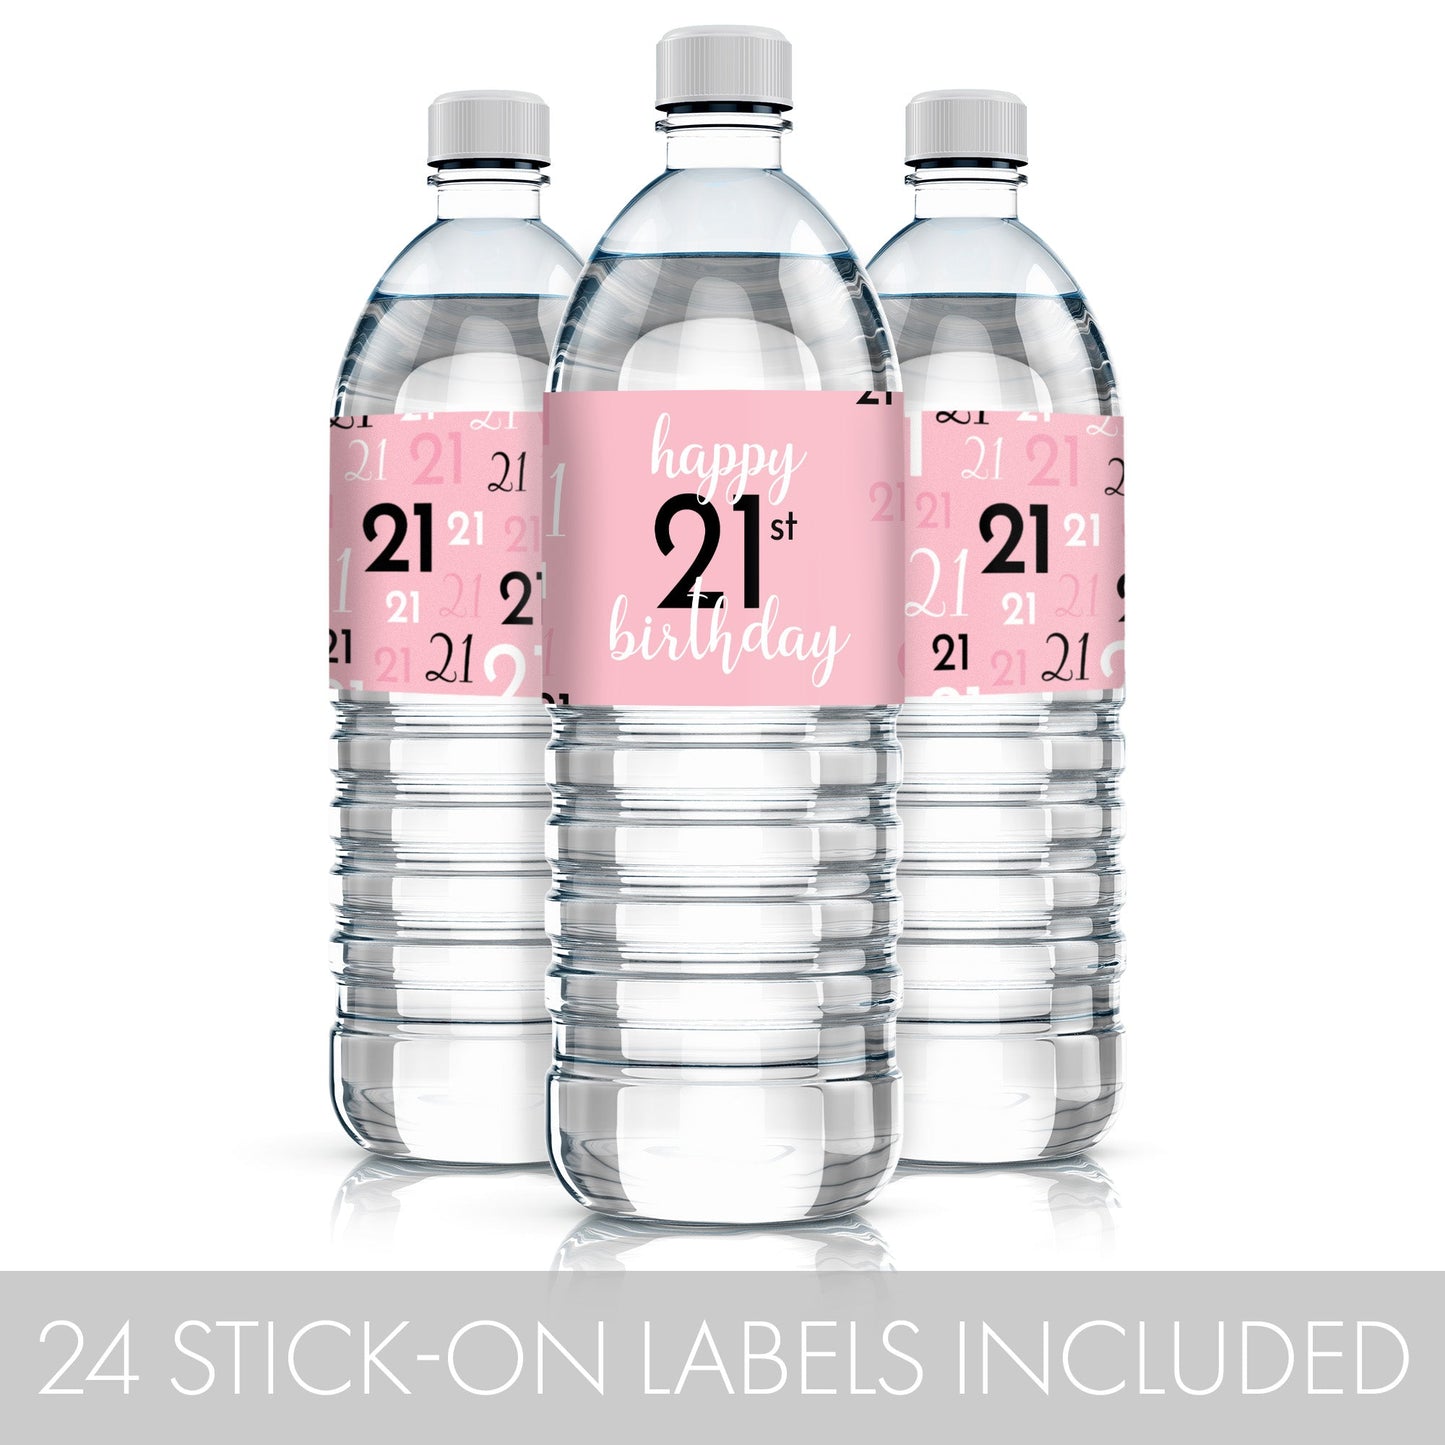 Eye-catching 21st birthday water bottle labels in pink and black with easy peel-and-stick application